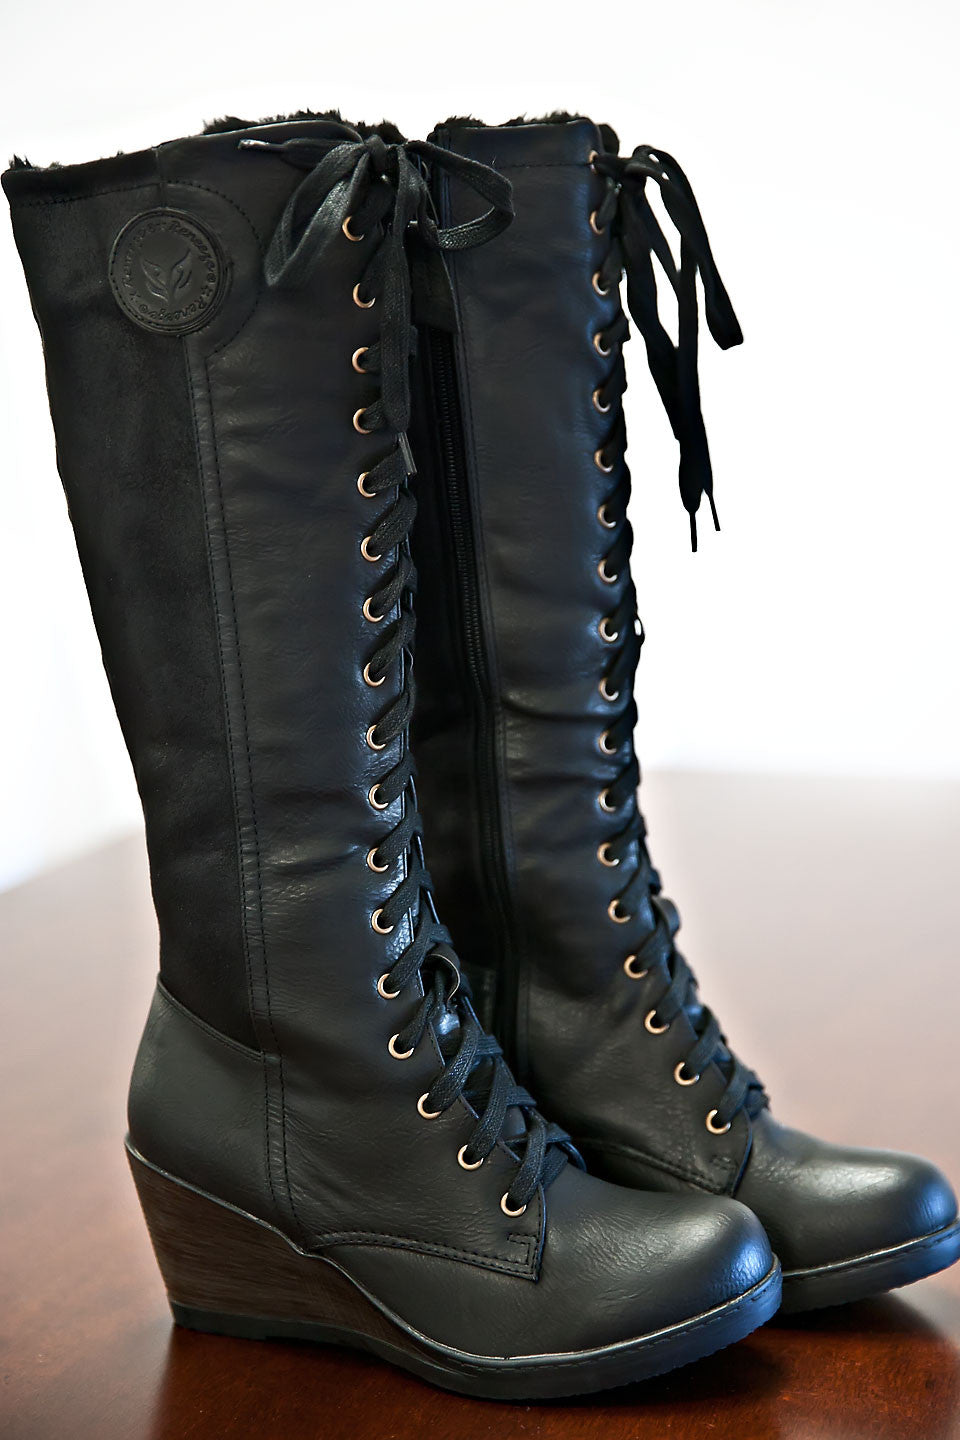 Breckenridge Fur Lined Lace-Up Boots 